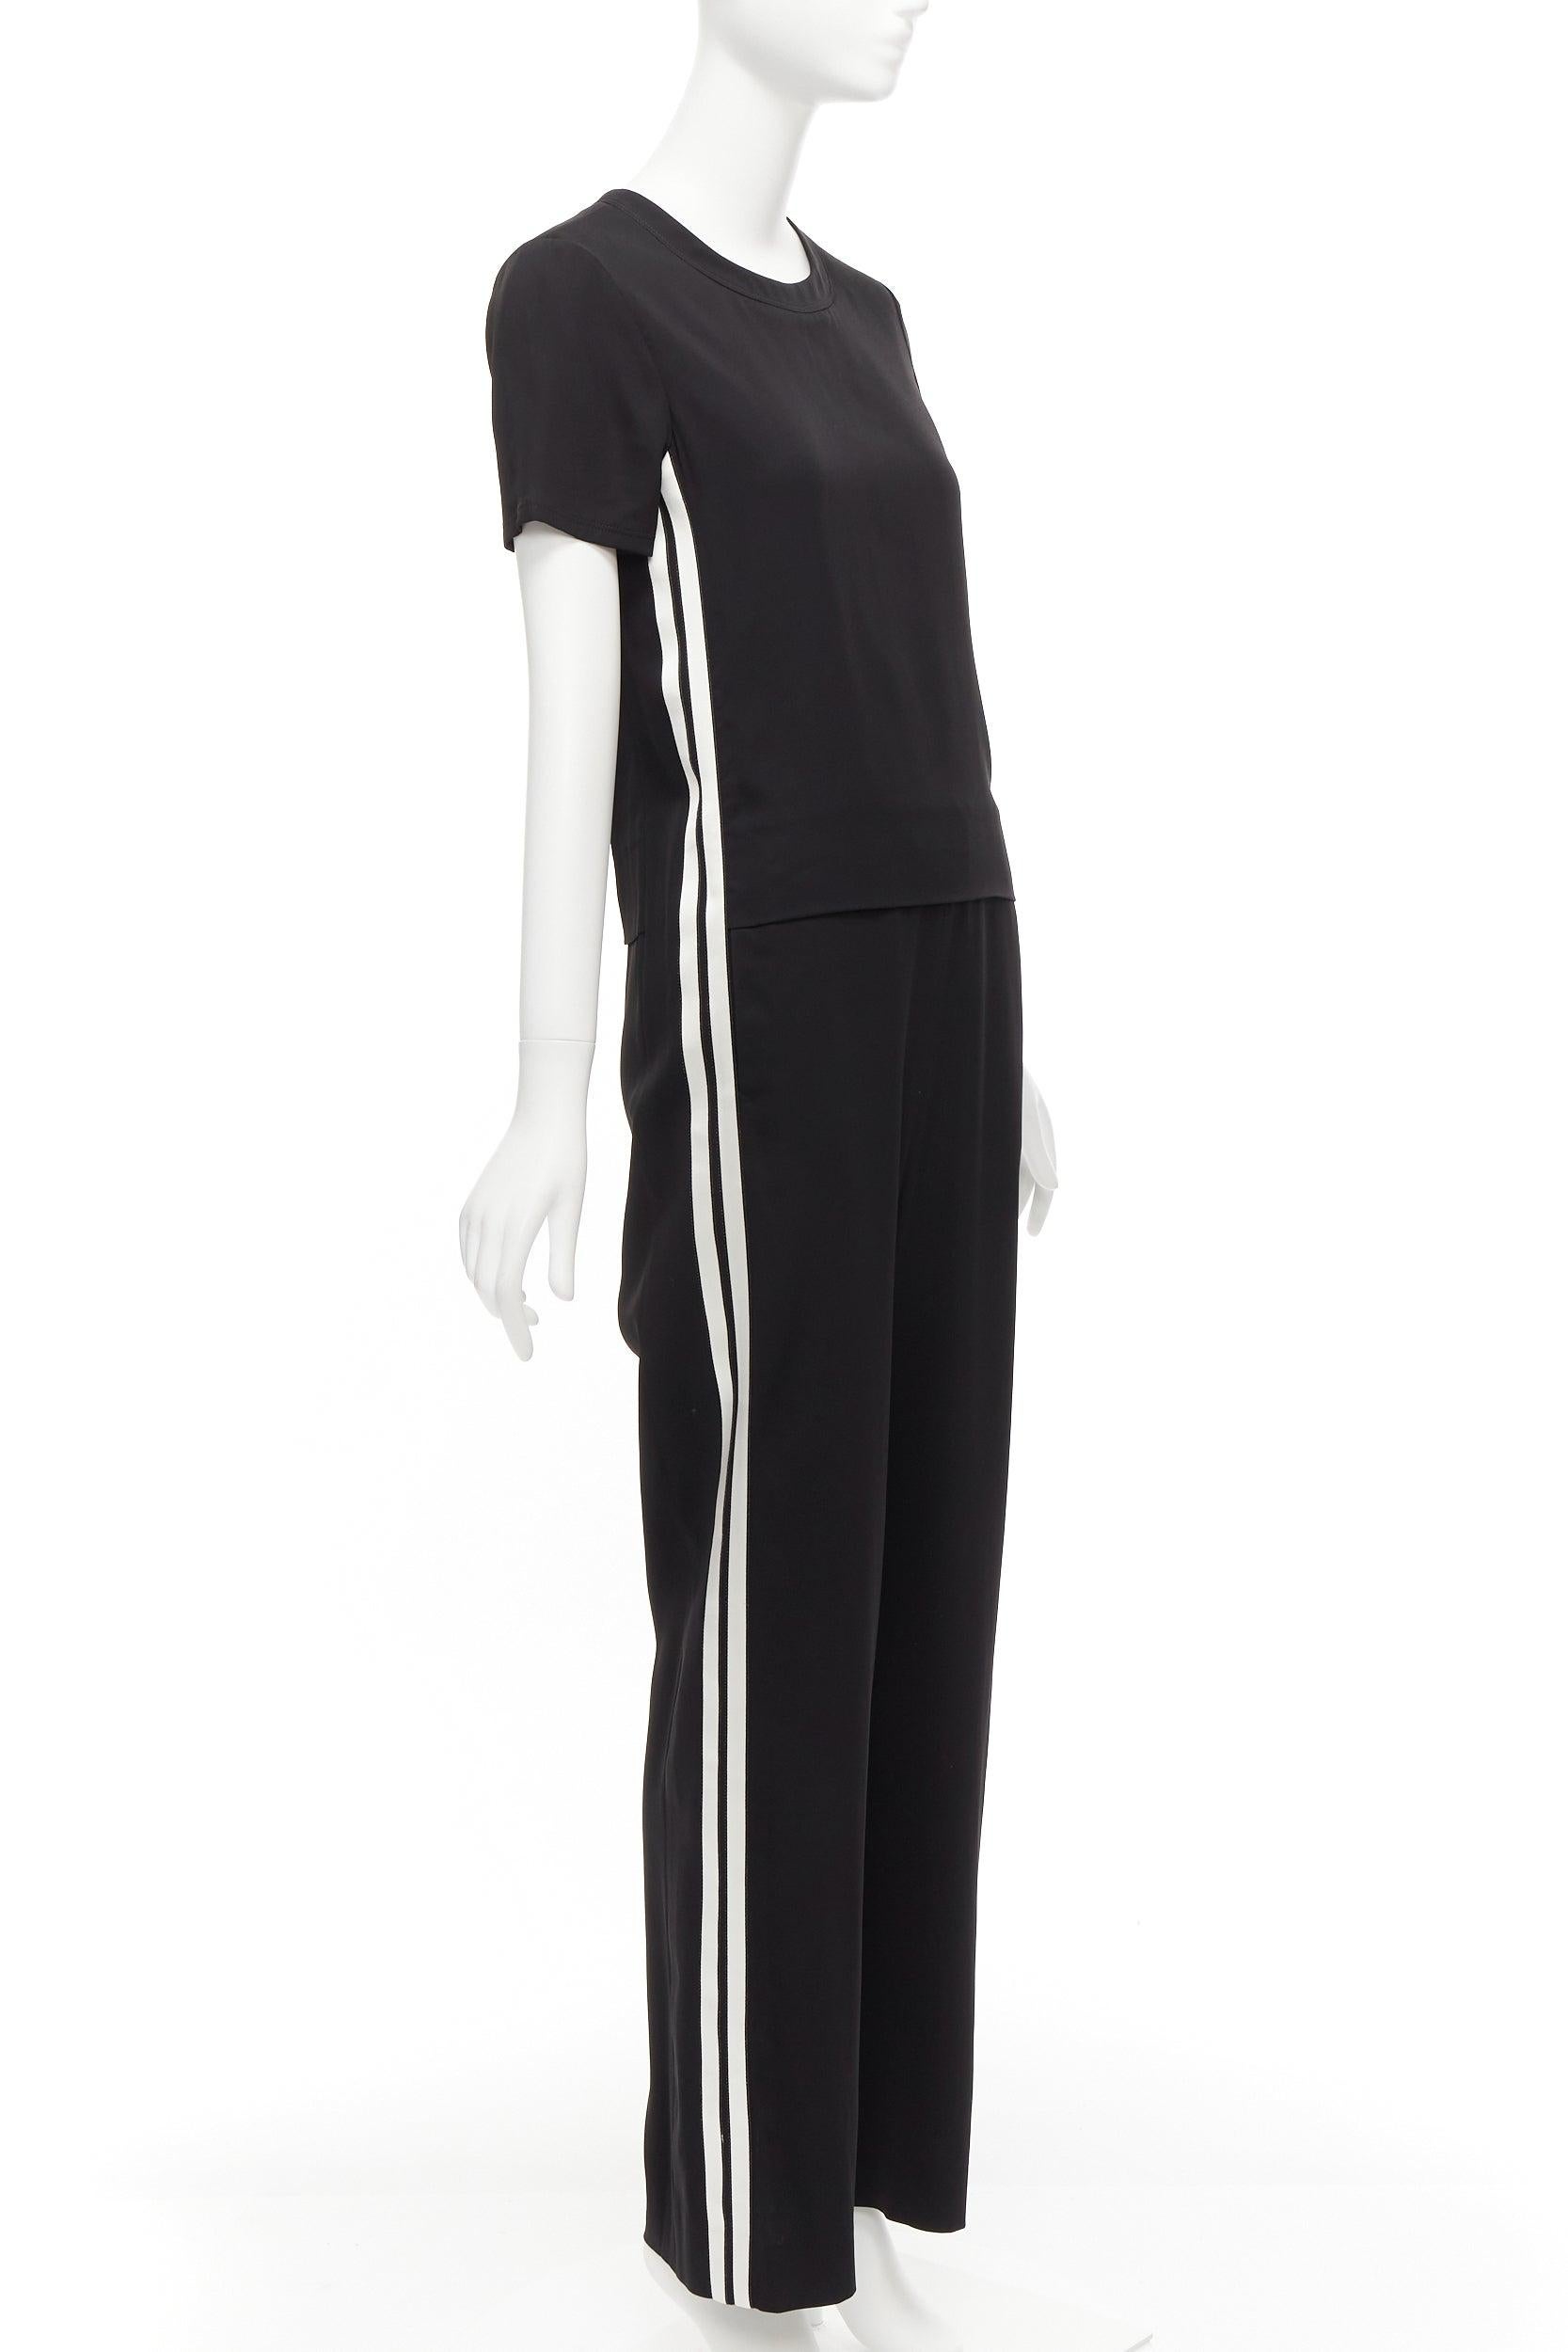 NEIL BARRETT black layered top white side stripes short crew jumpsuit FR38 M
Reference: NKLL/A00040
Brand: Neil Barrett
Material: Viscose
Color: Black, White
Pattern: Solid
Closure: Zip
Lining: Black Cupro
Extra Details: Back zip. Side white